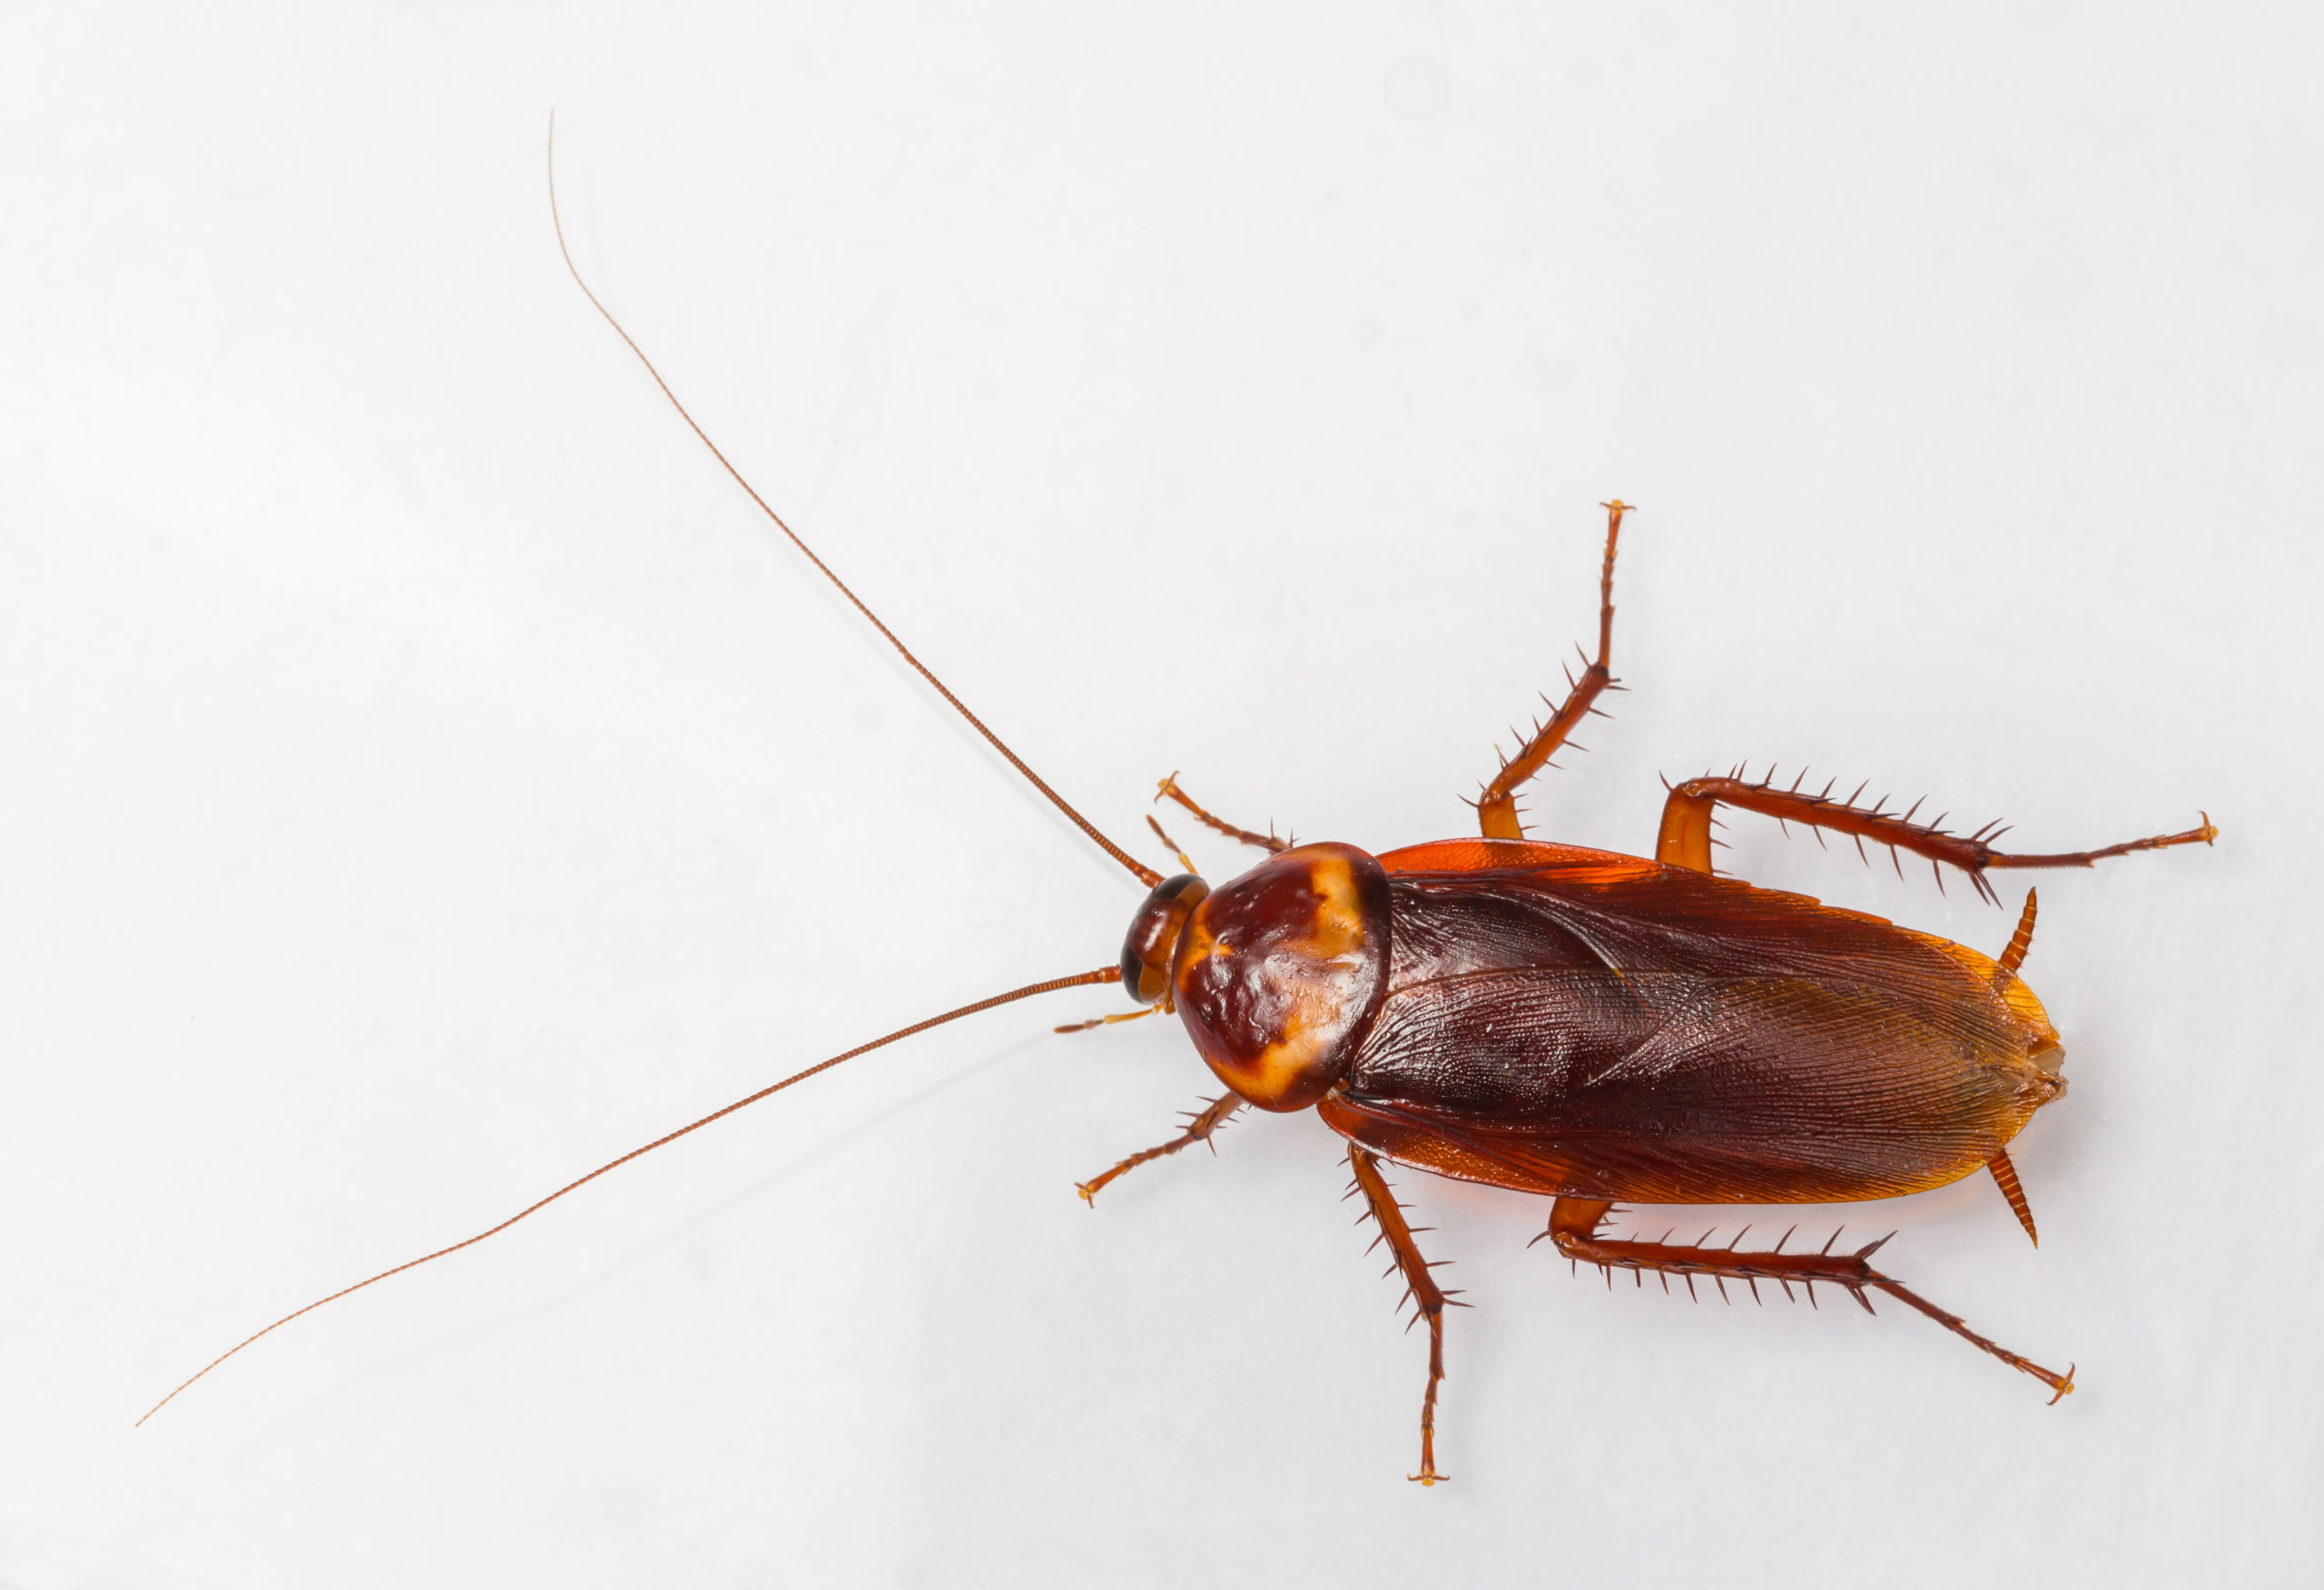 How To Get Rid Of Waterbugs In Georgia How to Identify 5 of the Most Common Cockroaches in Georgia | Roach Control